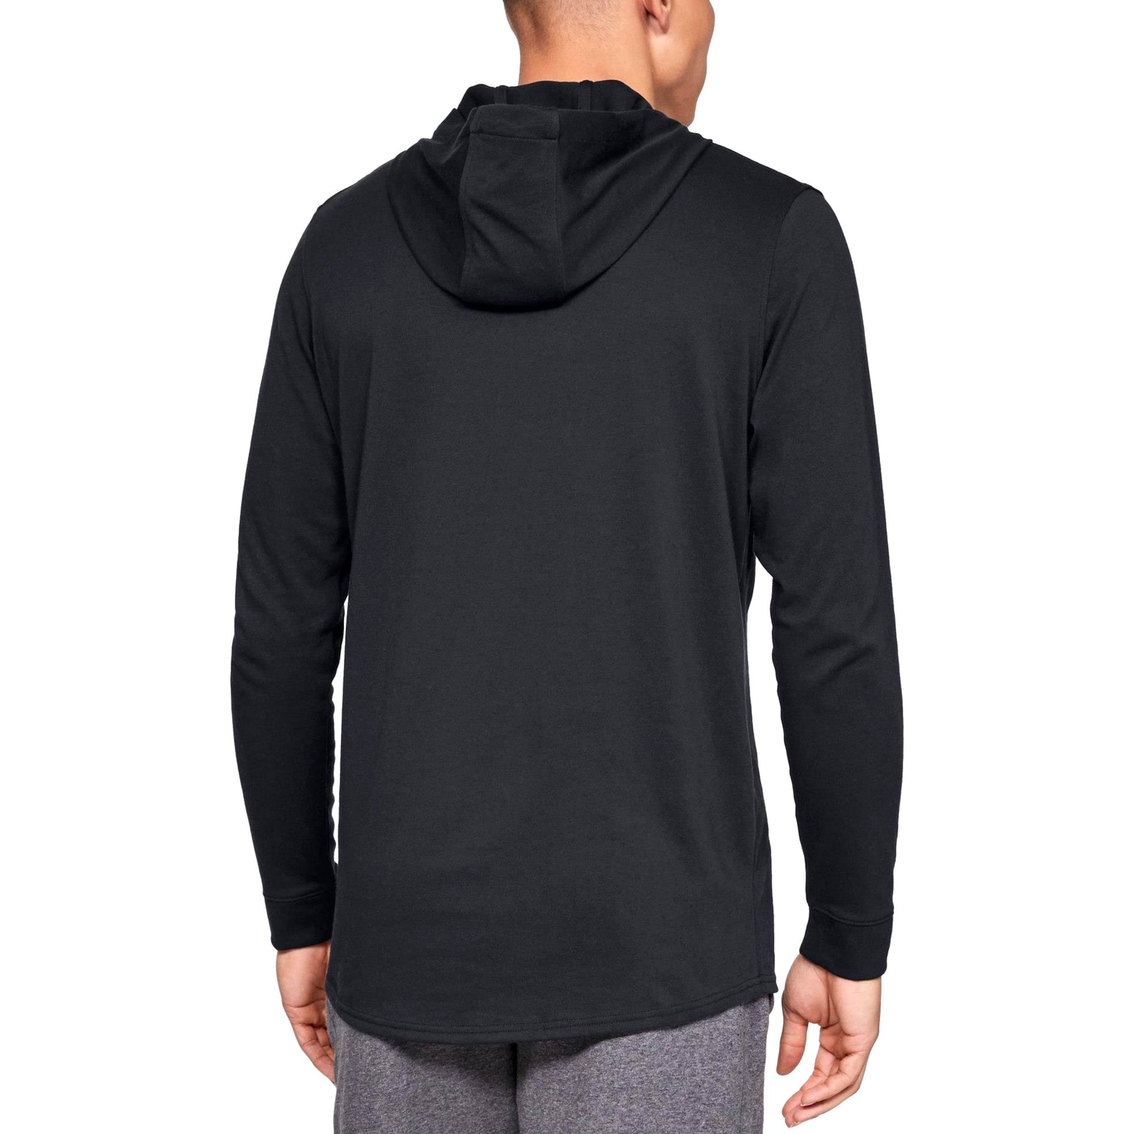 Under Armour Rival Jersey Hoodie - Image 2 of 2